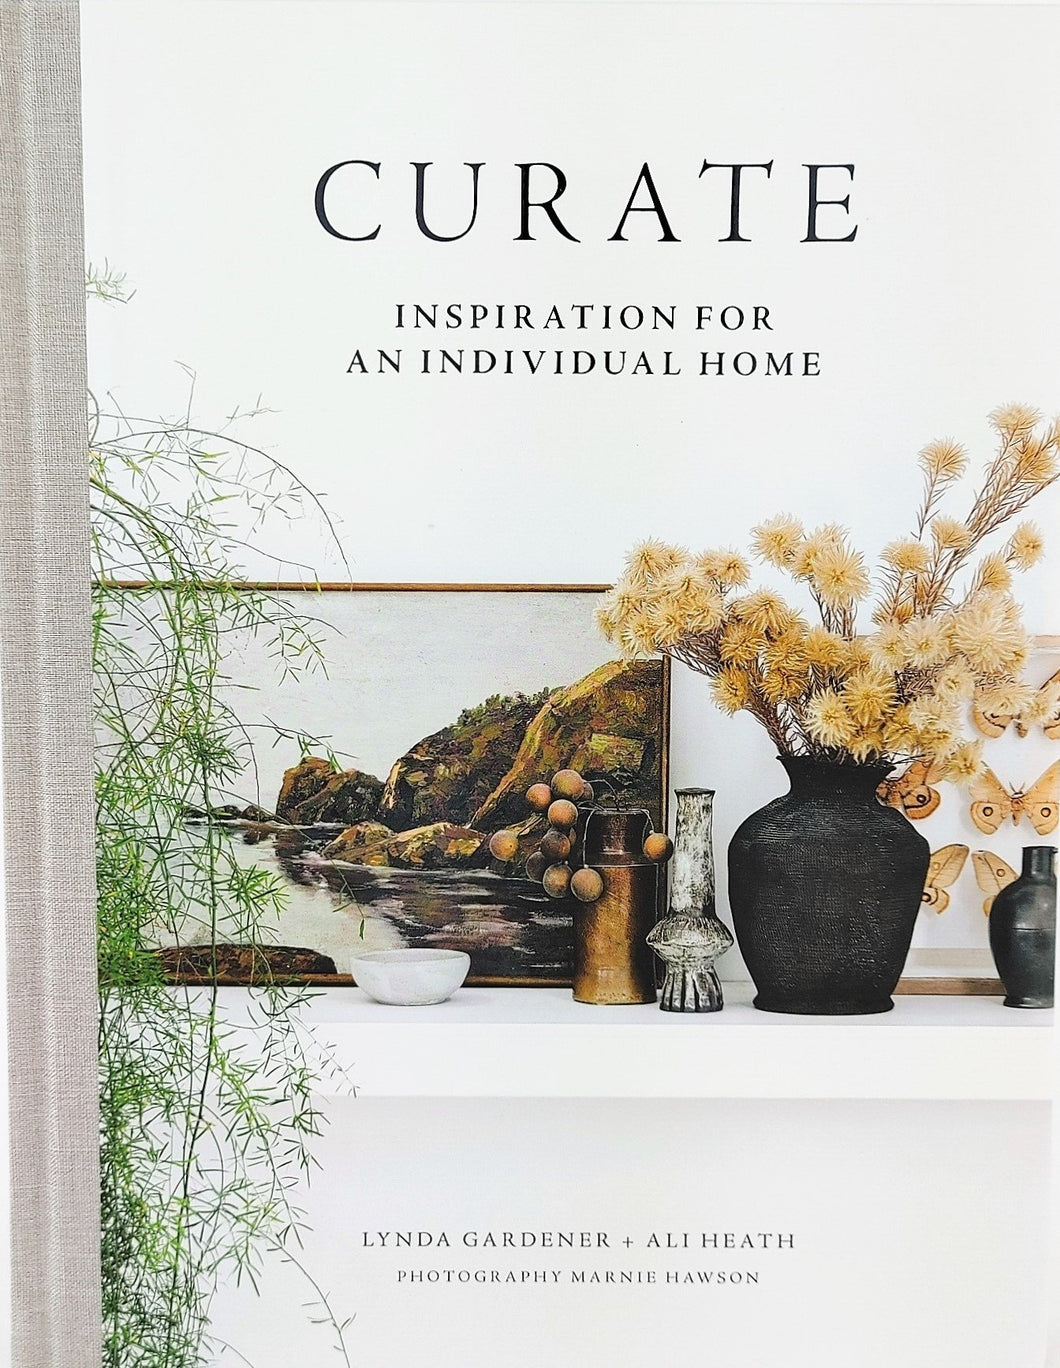 Front cover of book titled Curate, Cover has artwork, vases, vase with flowers, sitting on a mantle with green plant on side.